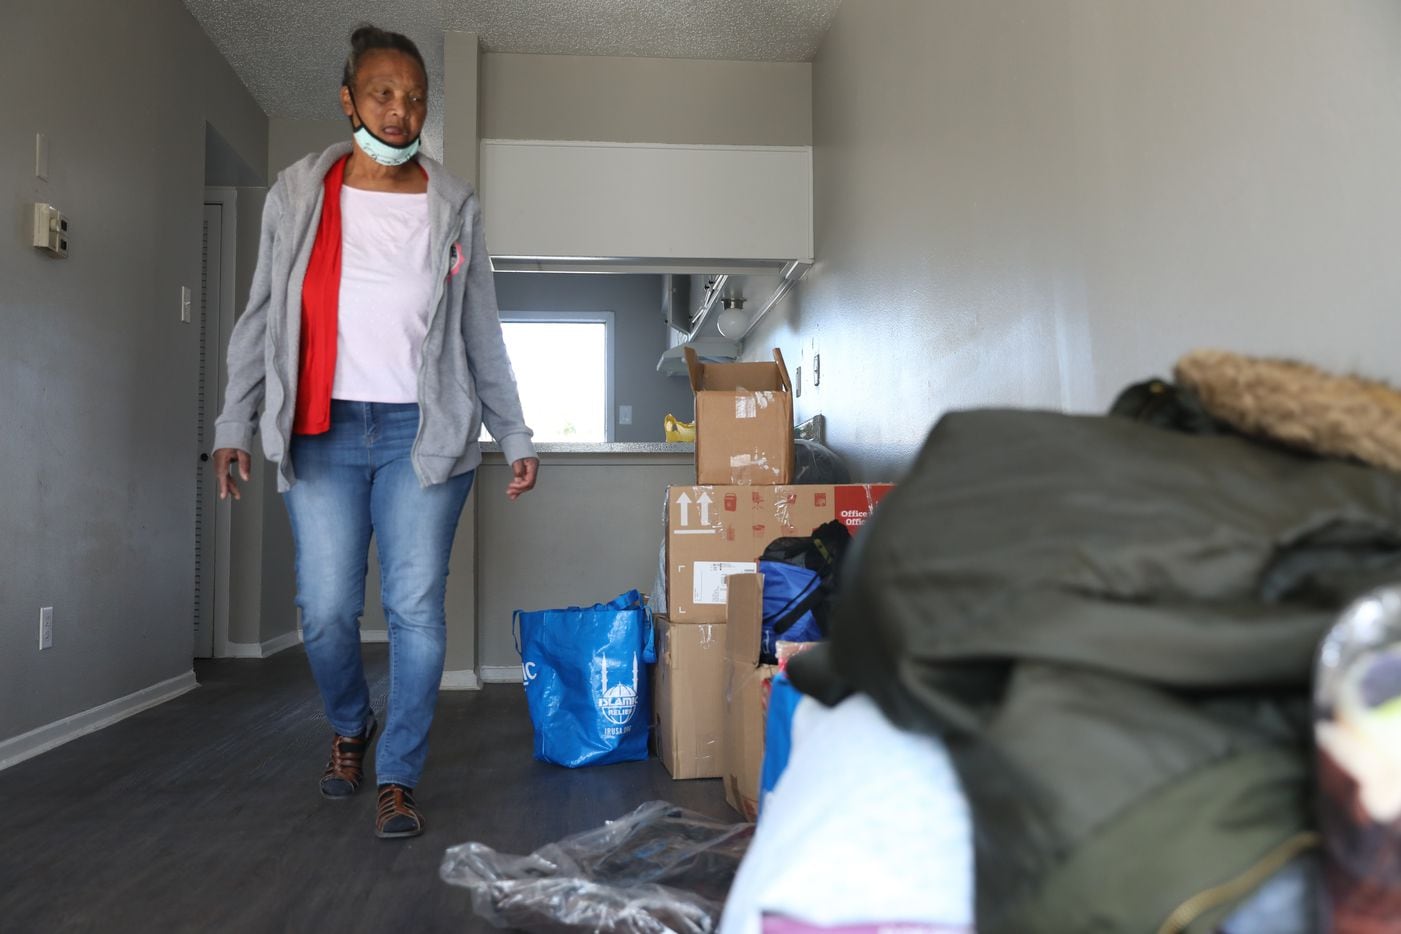 Patricia Freeman walks up to the pile of her belongings to begin the process of unpacking her new apartment in southern Dallas on November 19, 2021. (Liesbeth Powers/Special Contributor)